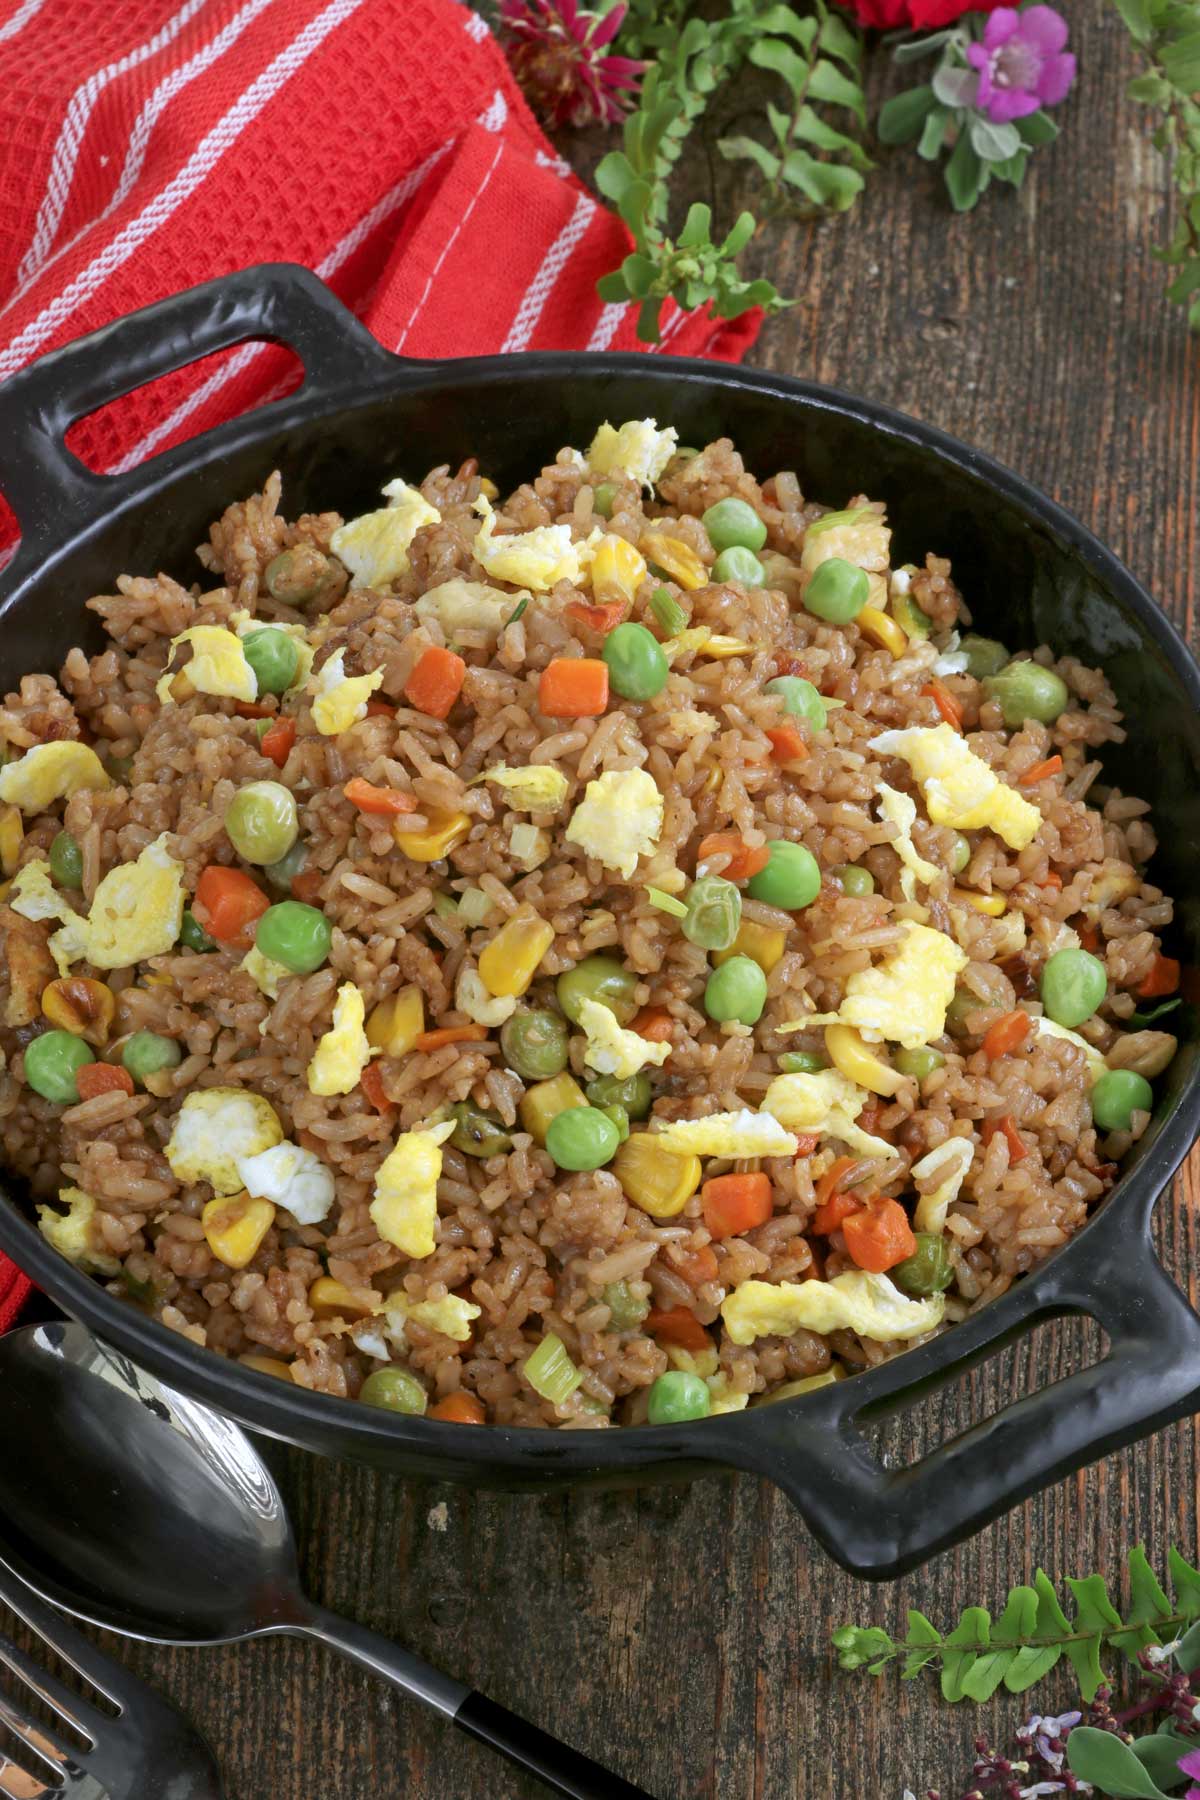 Chaofan or Chinese Fried Rice with vegetables and eggs.